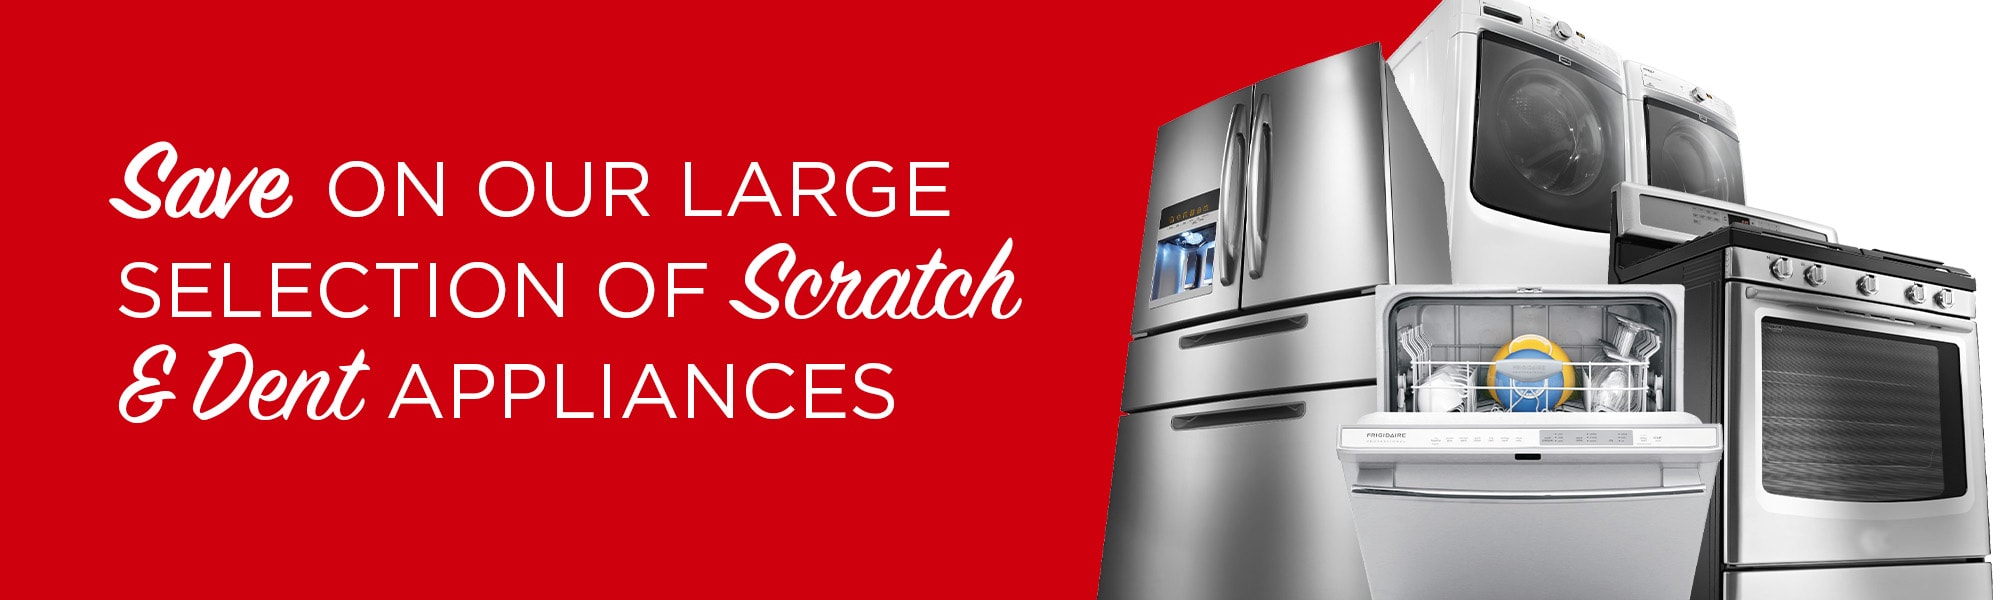 Appliance Outlet: Out of Box, Scratch/Dent, Clearance